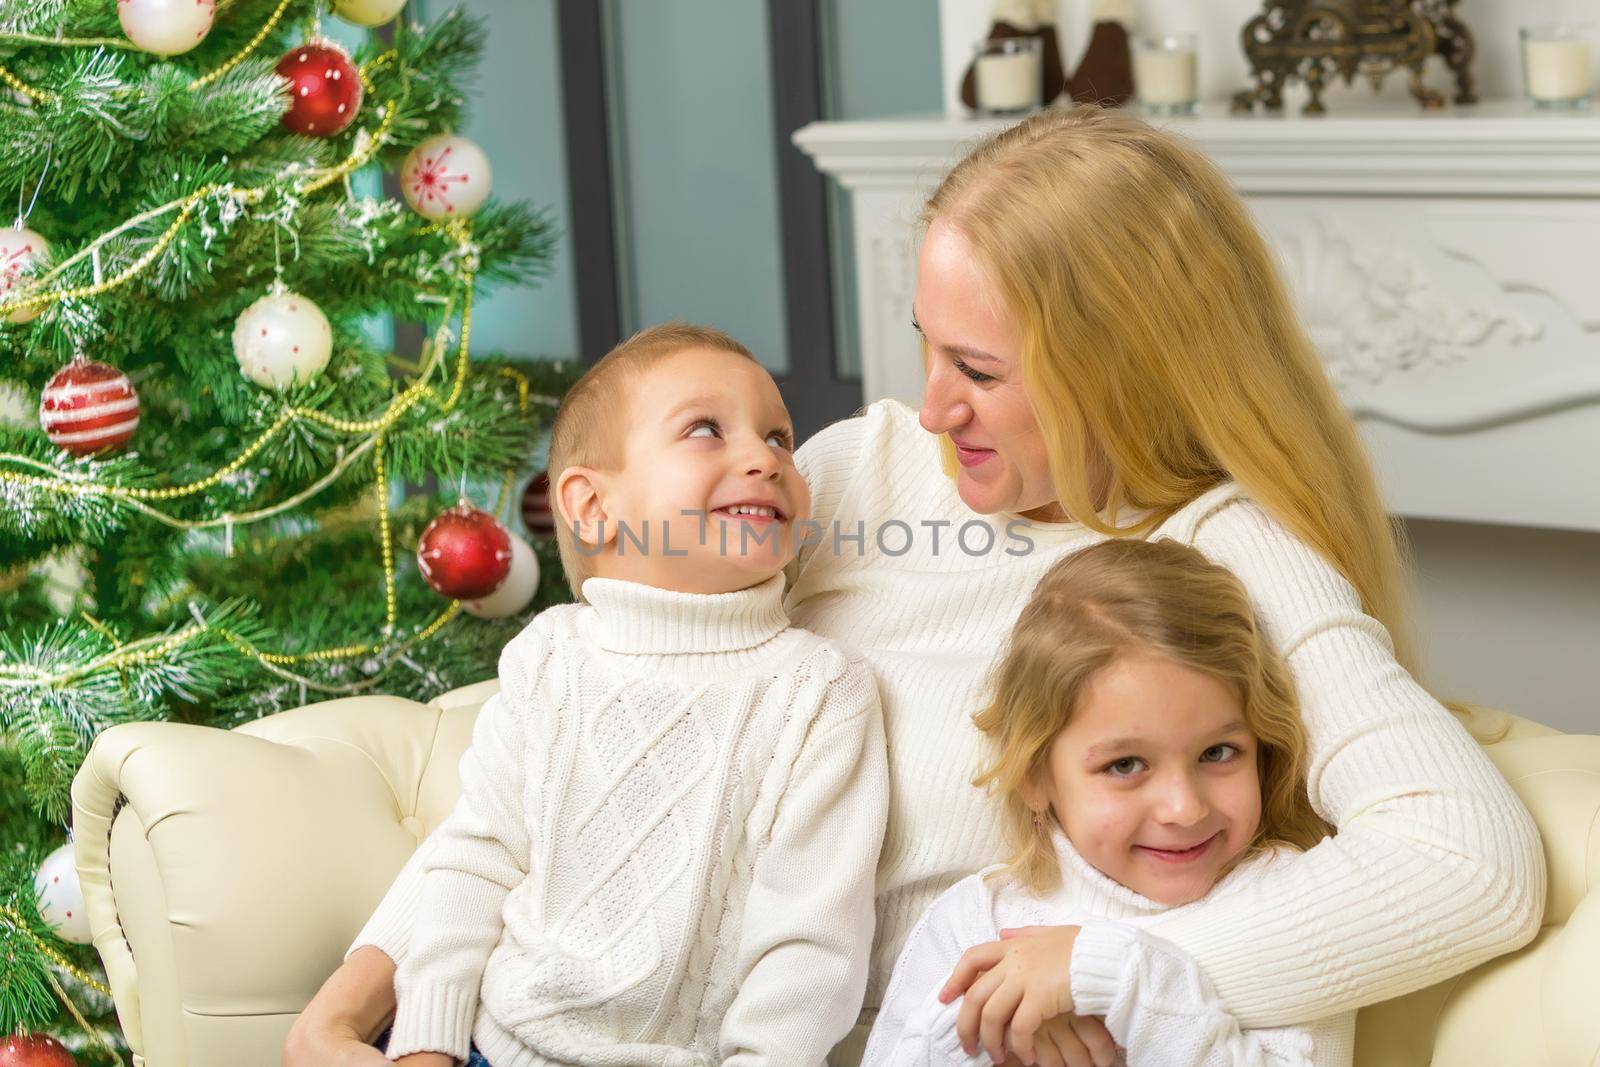 Happy Family Sitting on the Sofa in Christmas Interior with Decorated Fir Tree and Fireplace, Mom Hugging her Cute Little Kids, Her Son and Daughter Looking Lovingly at Her